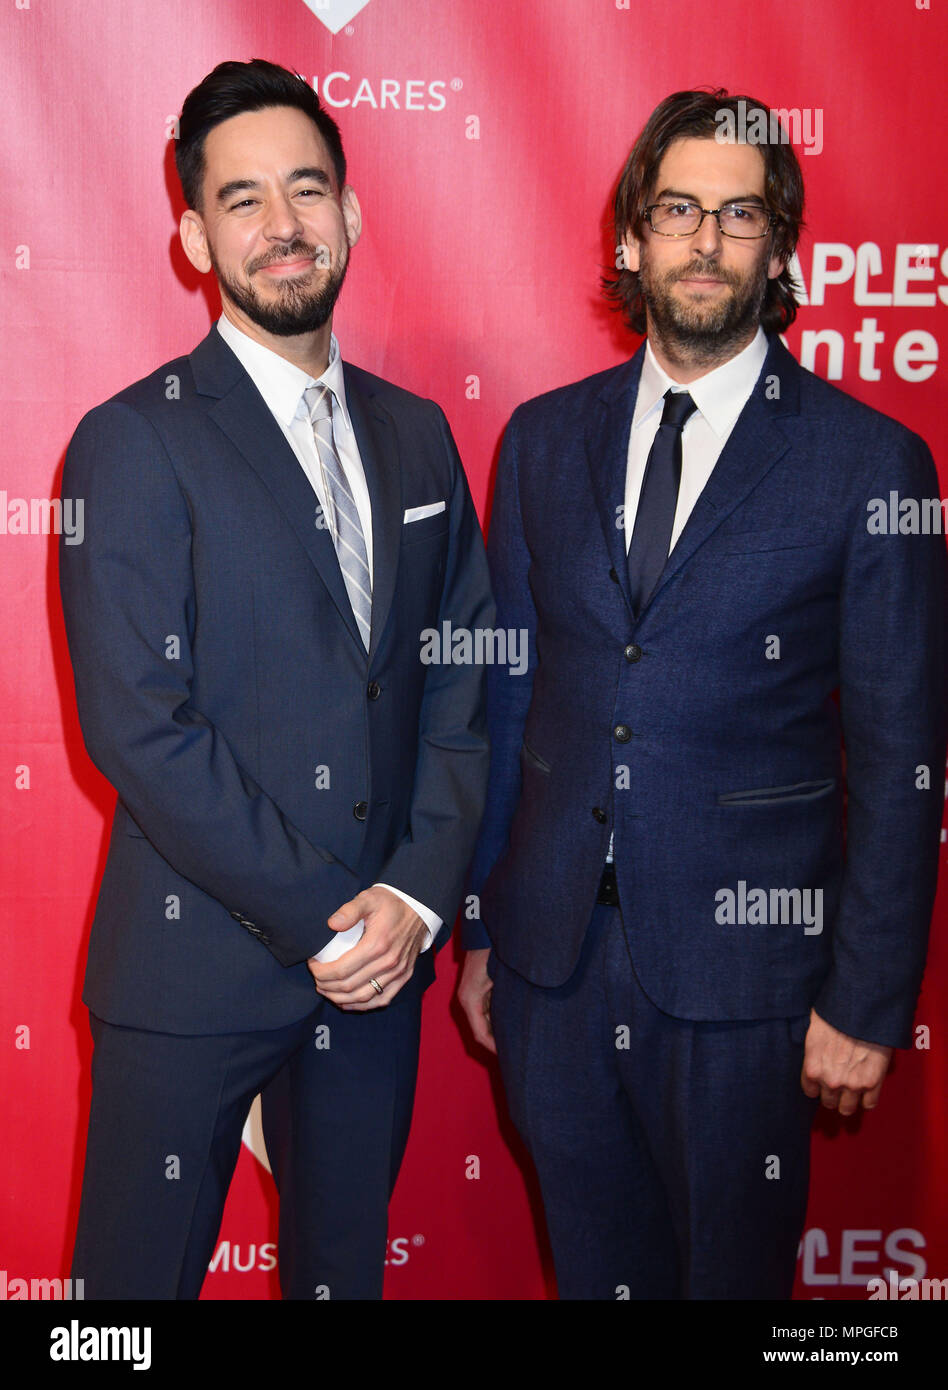 Mike Shinoda, Rob Bourdon - Linkin Park - 079 at 2016 MusiCares Person of the Year Dinner honoring Lionel Richie at the Convention Center in Los Angeles. February 13, 2016.Mike Shinoda, Rob Bourdon - Linkin Park - 079  Event in Hollywood Life - California, Red Carpet Event, USA, Film Industry, Celebrities, Photography, Bestof, Arts Culture and Entertainment, Topix Celebrities fashion, Best of, Hollywood Life, Event in Hollywood Life - California, Red Carpet and backstage, movie celebrities, TV celebrities, Music celebrities, Arts Culture and Entertainment, vertical, one person, Photography,    Stock Photo